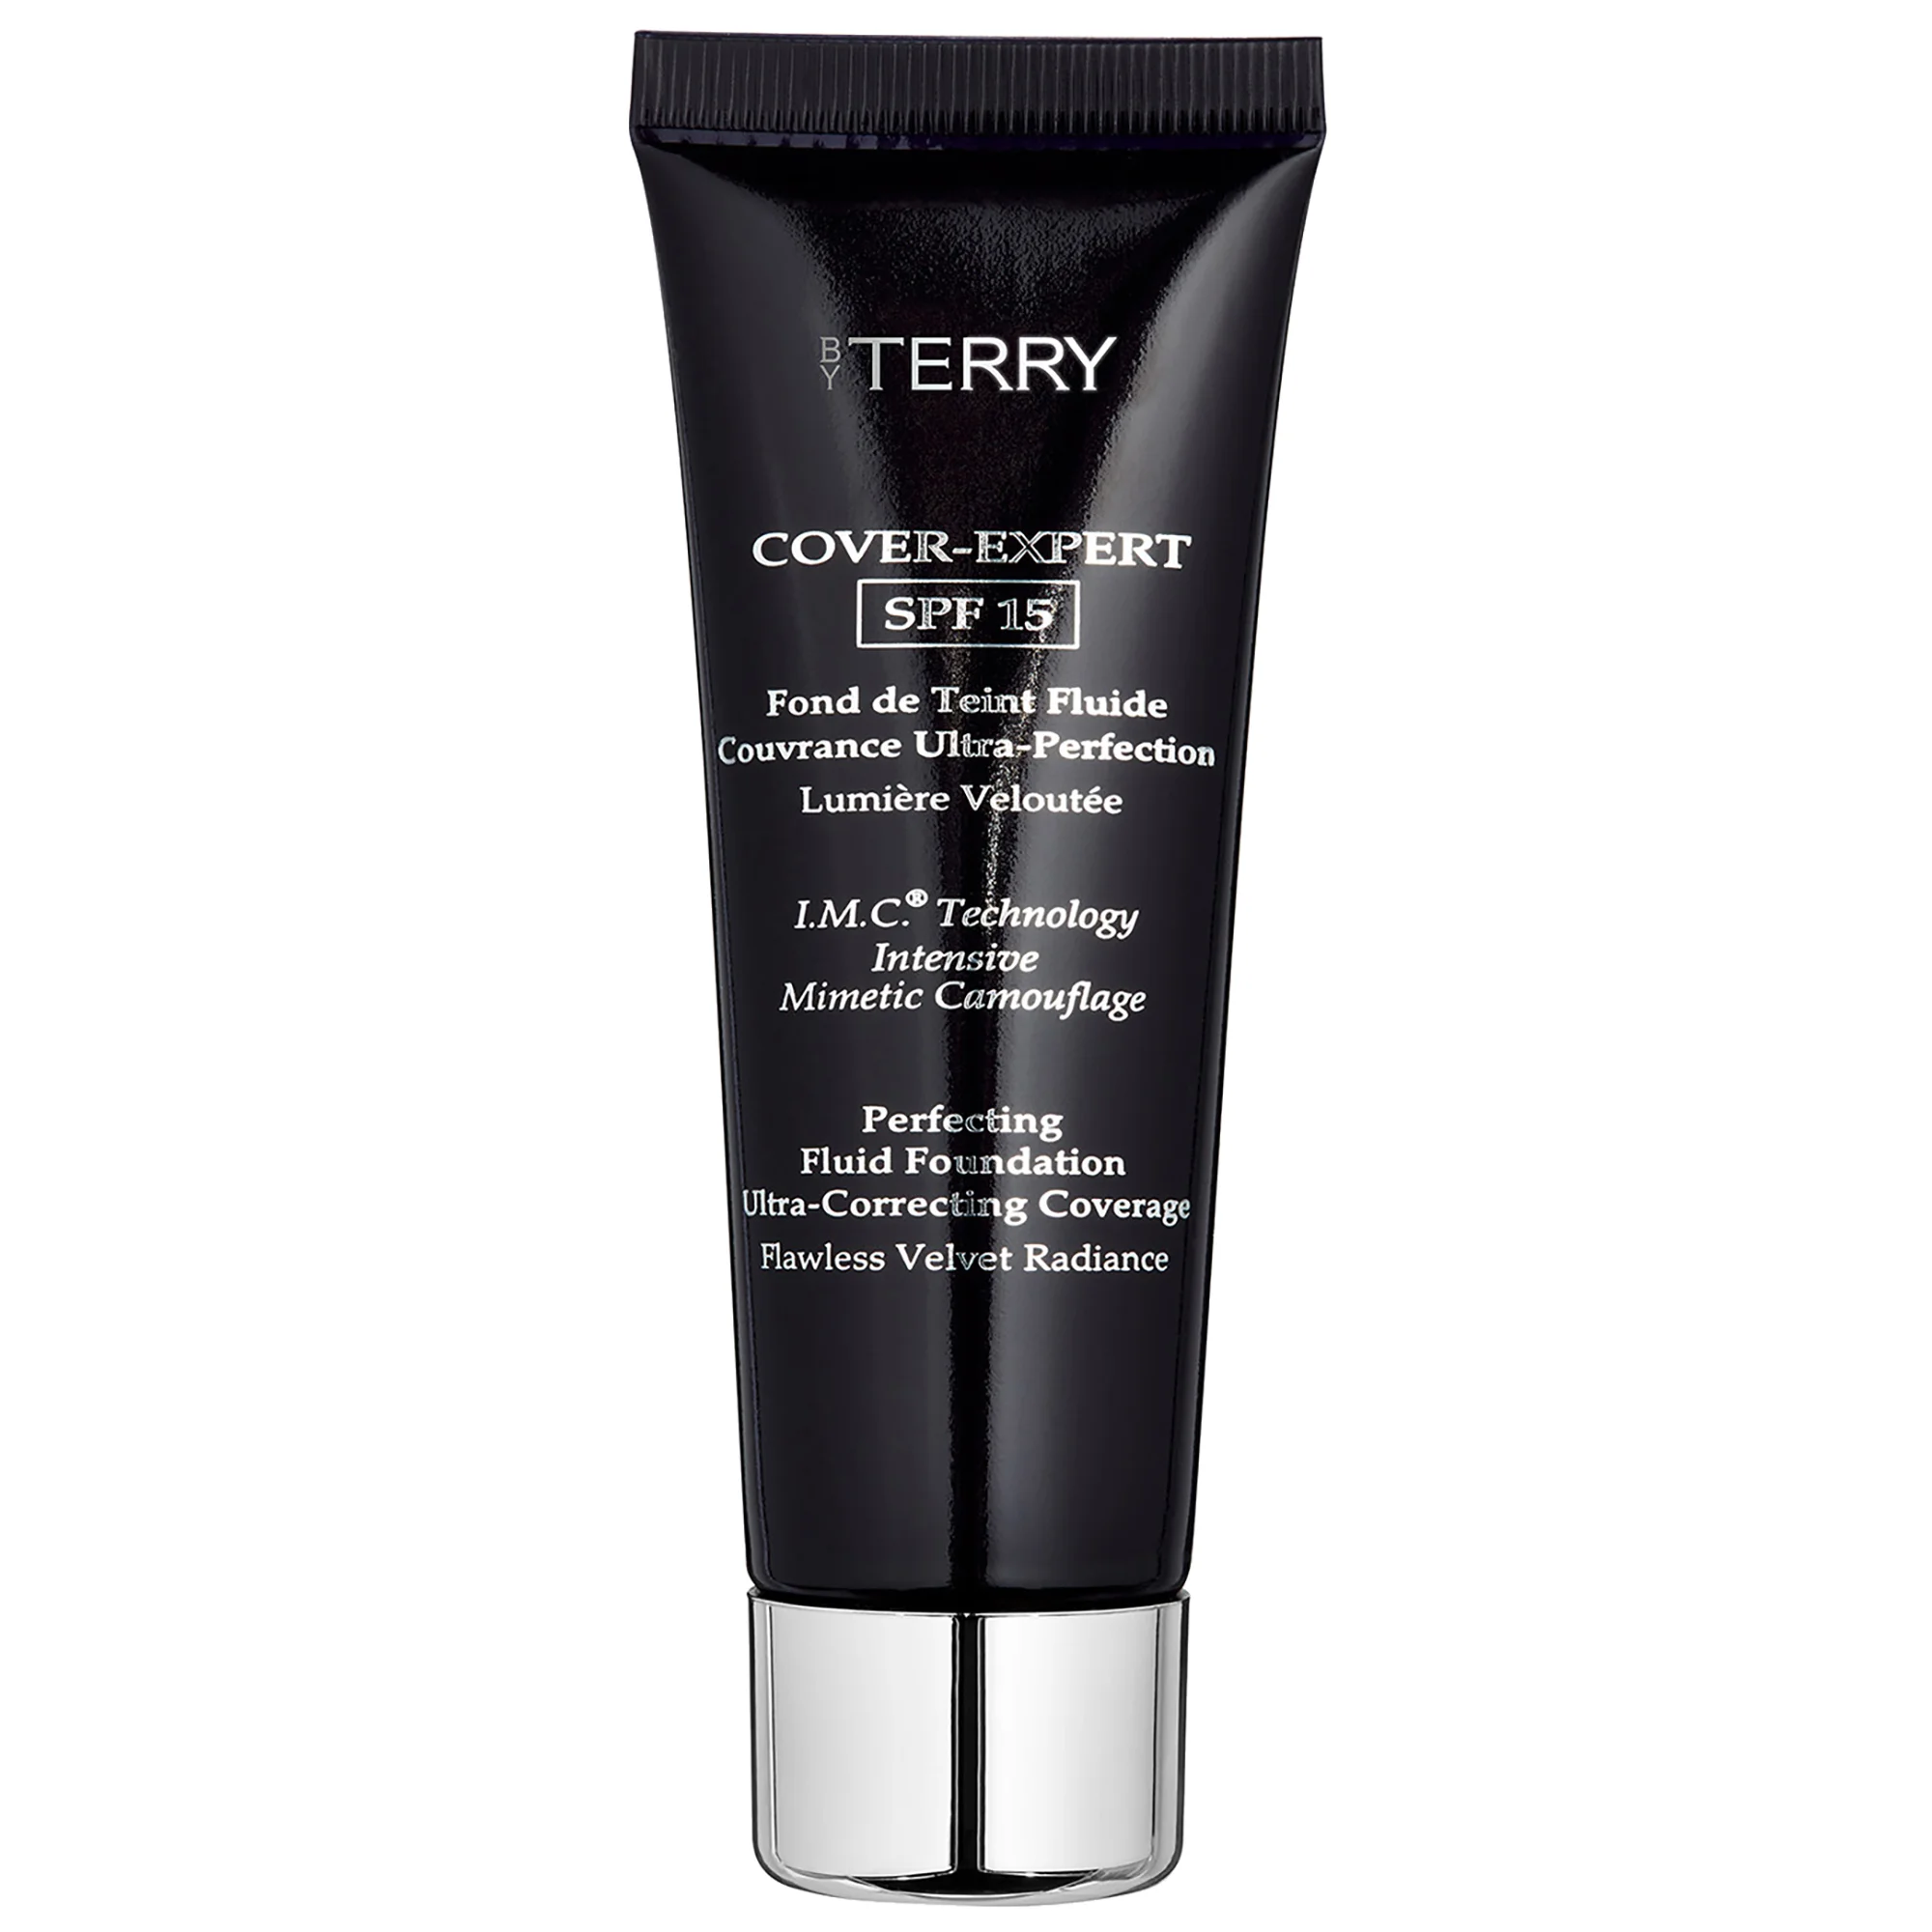 By Terry Cover-Expert Foundation SPF15 35ml (Various Shades) Image 1